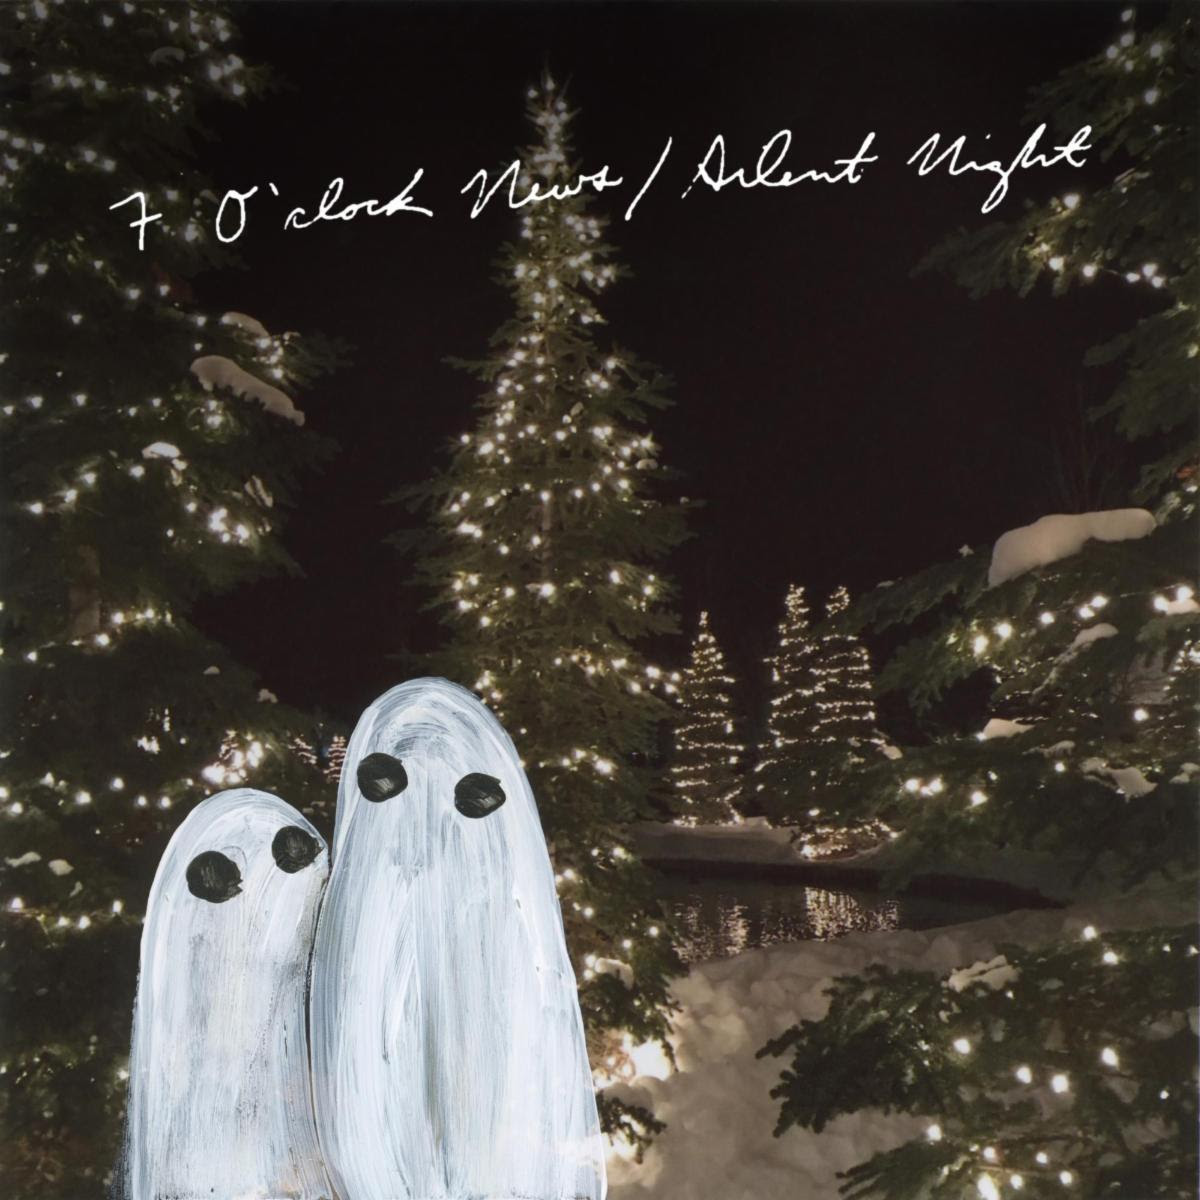 Phoebe Bridgers has released a song just in time for the holidays. This recording - “7 O’Clock News/Silent Night” - features Fiona Apple, on joint vocals